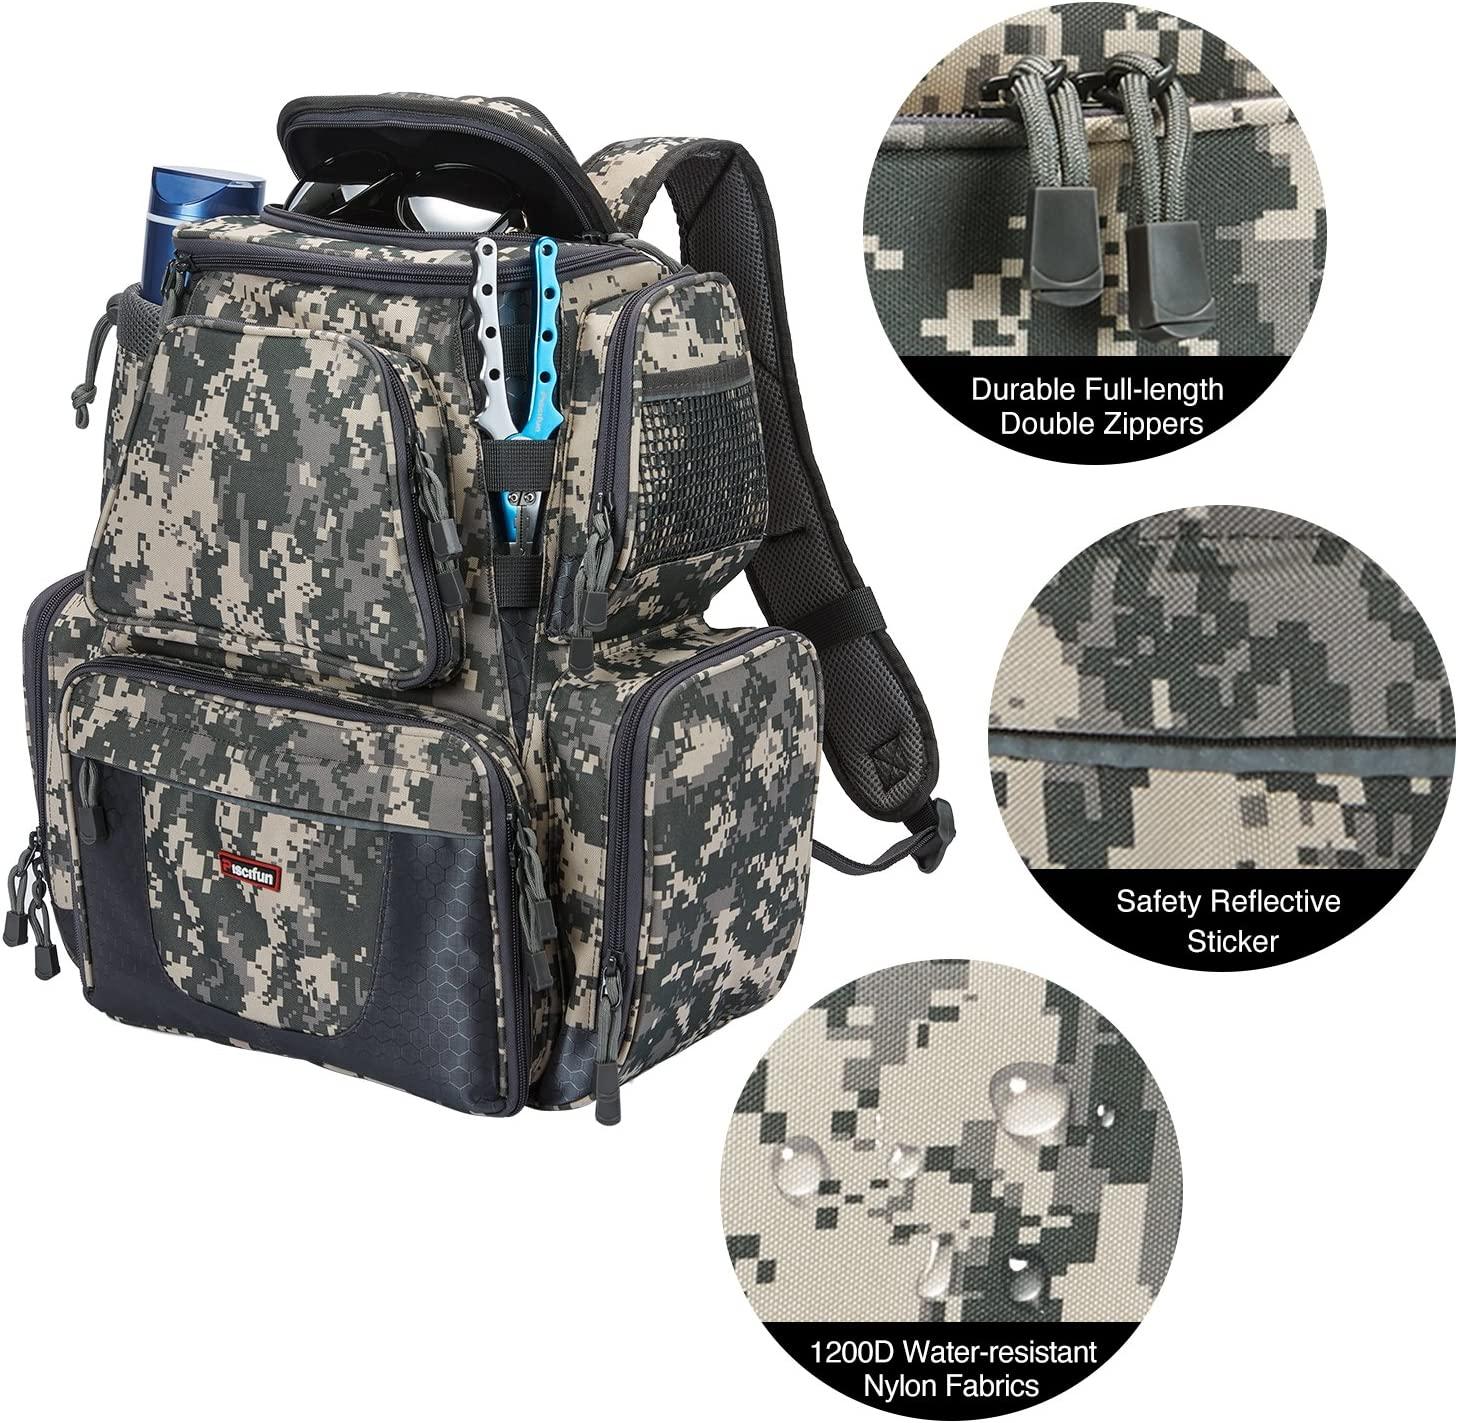 PISCIFUN TACKLE BACKPACK REIVEW